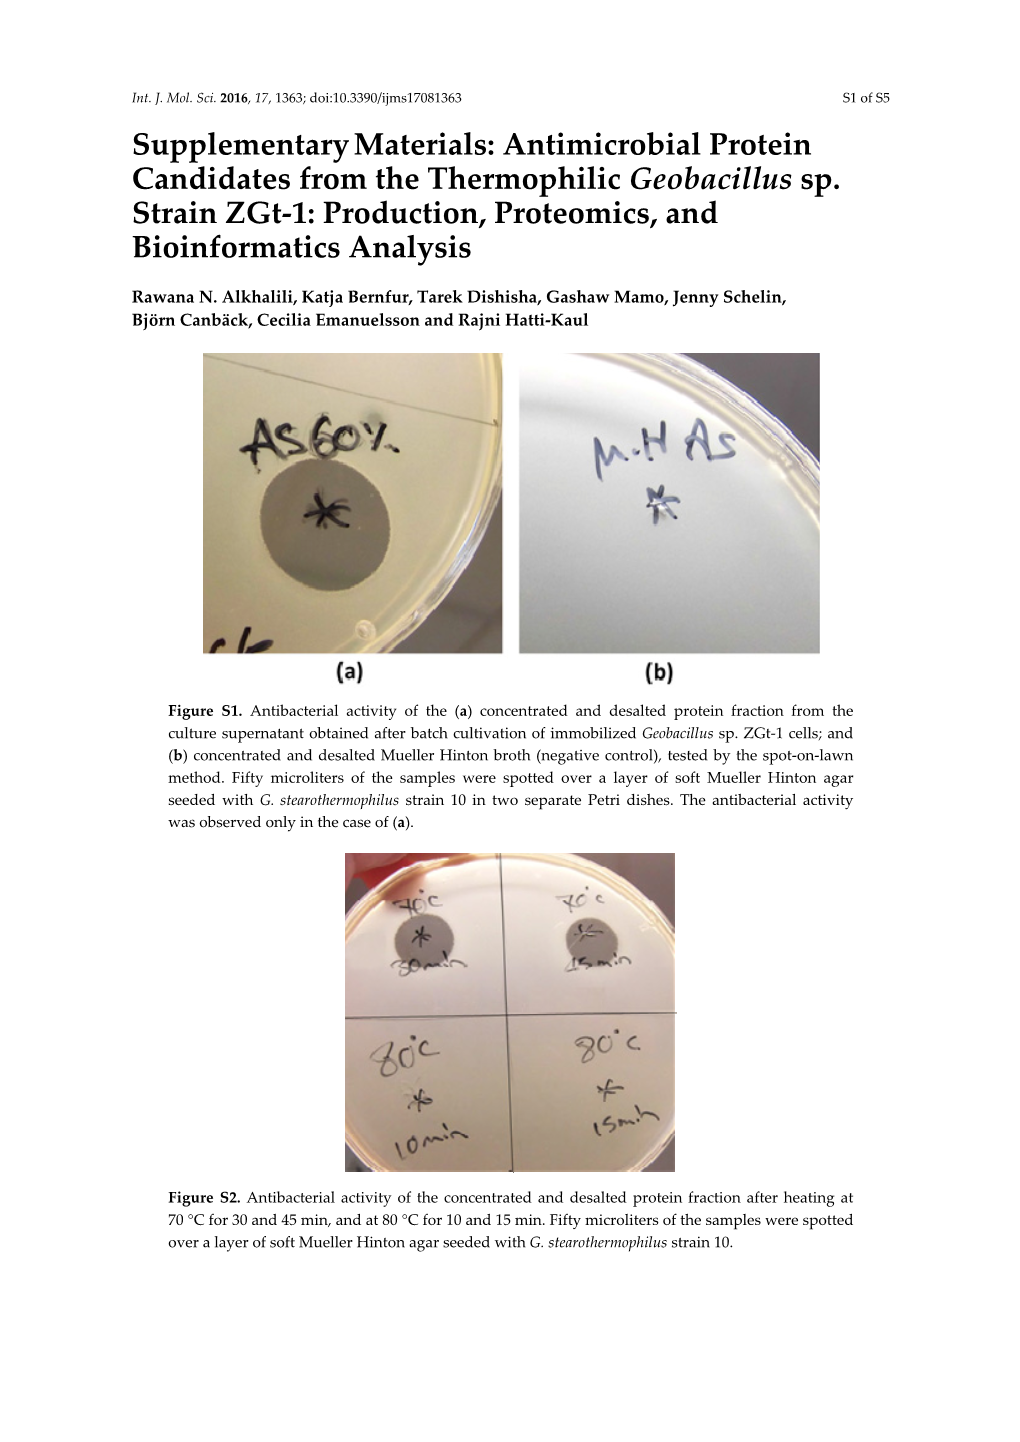 Antimicrobial Protein Candidates from the Thermophilic Geobacillus Sp